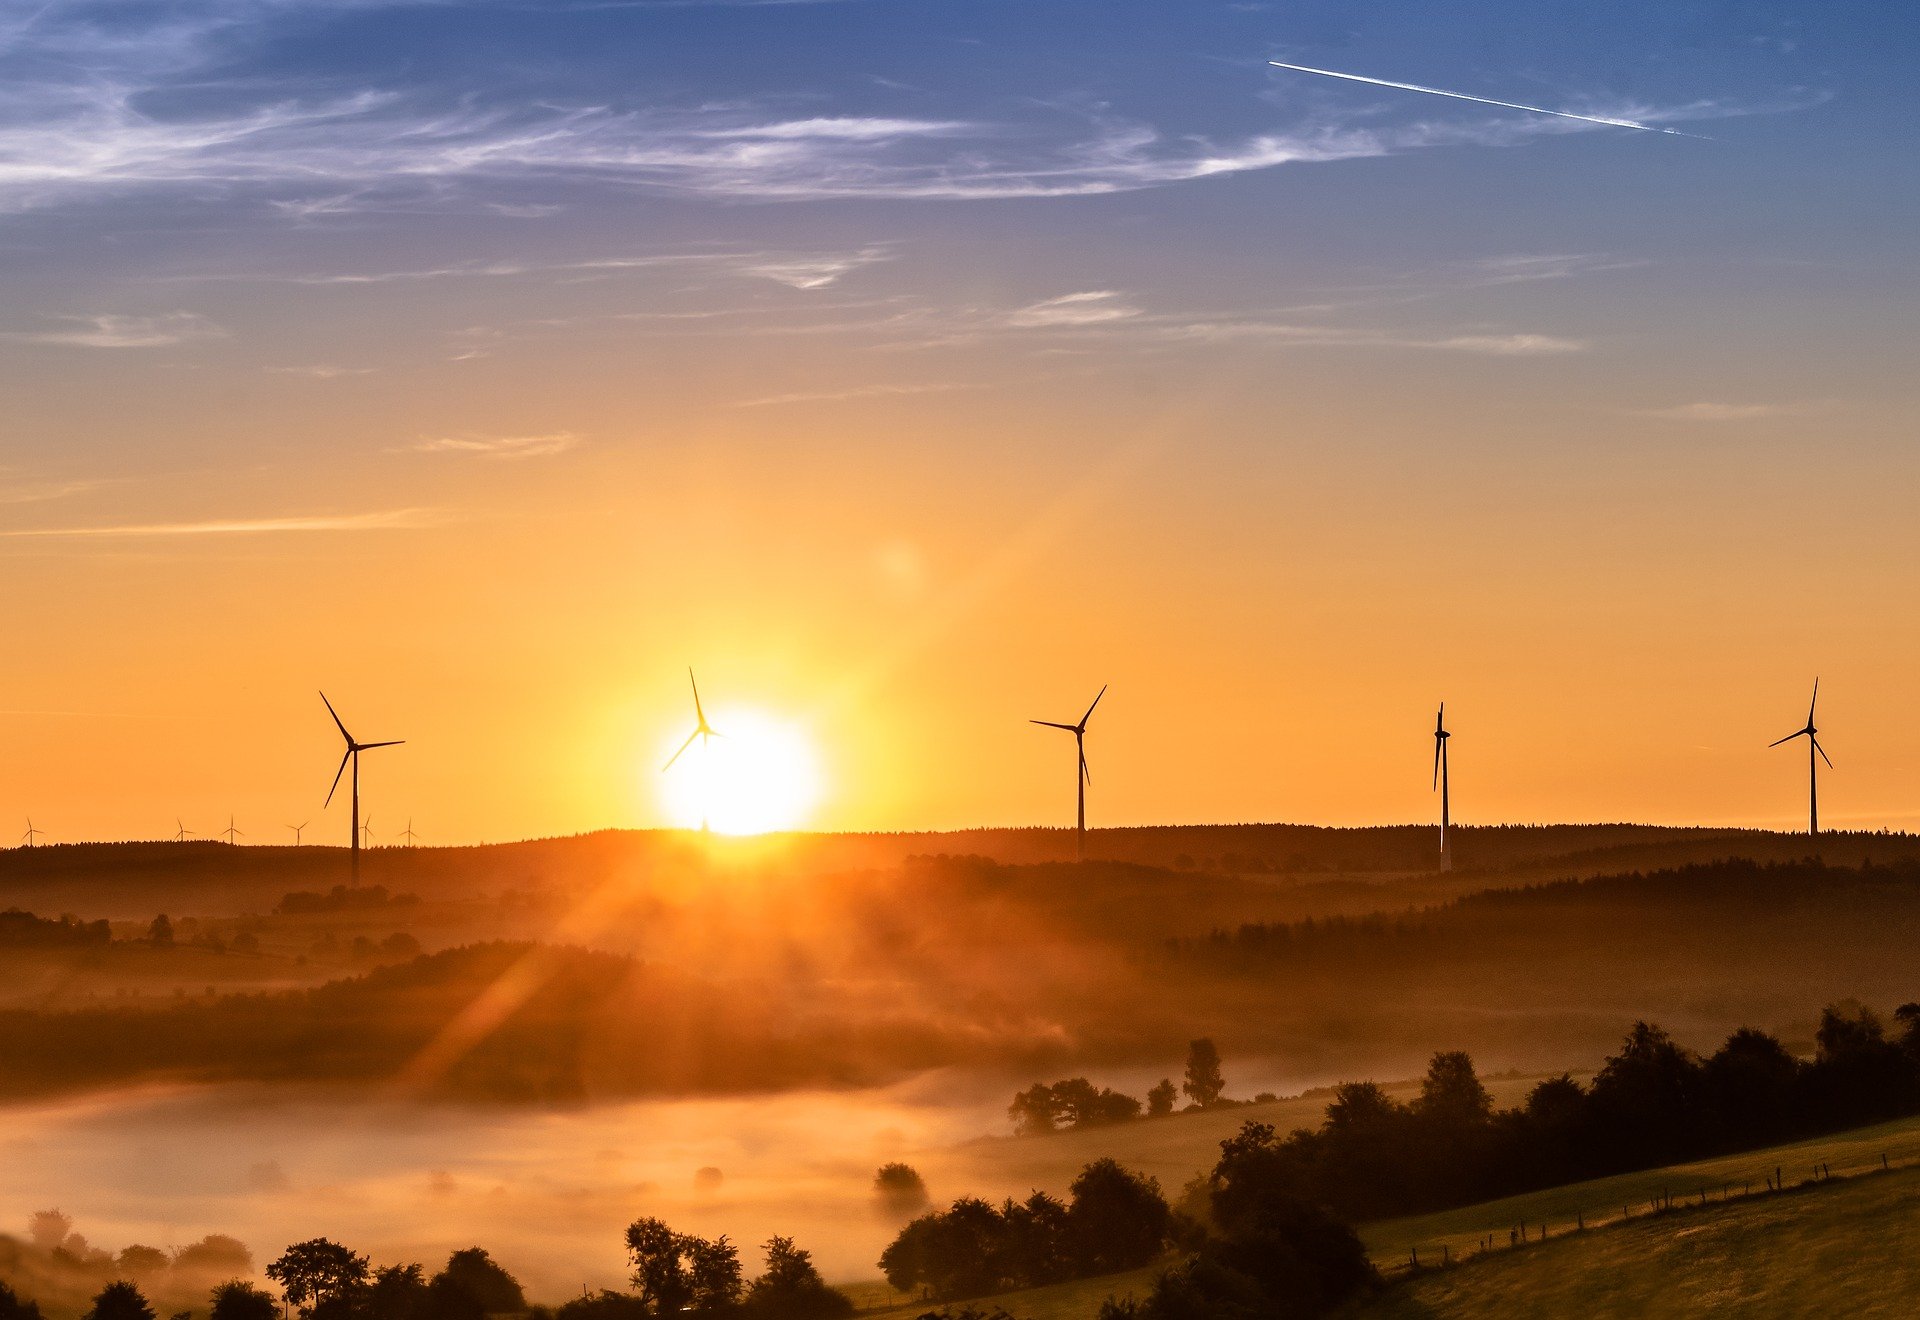 Wind turbines in a misty rural landscape at sunrise